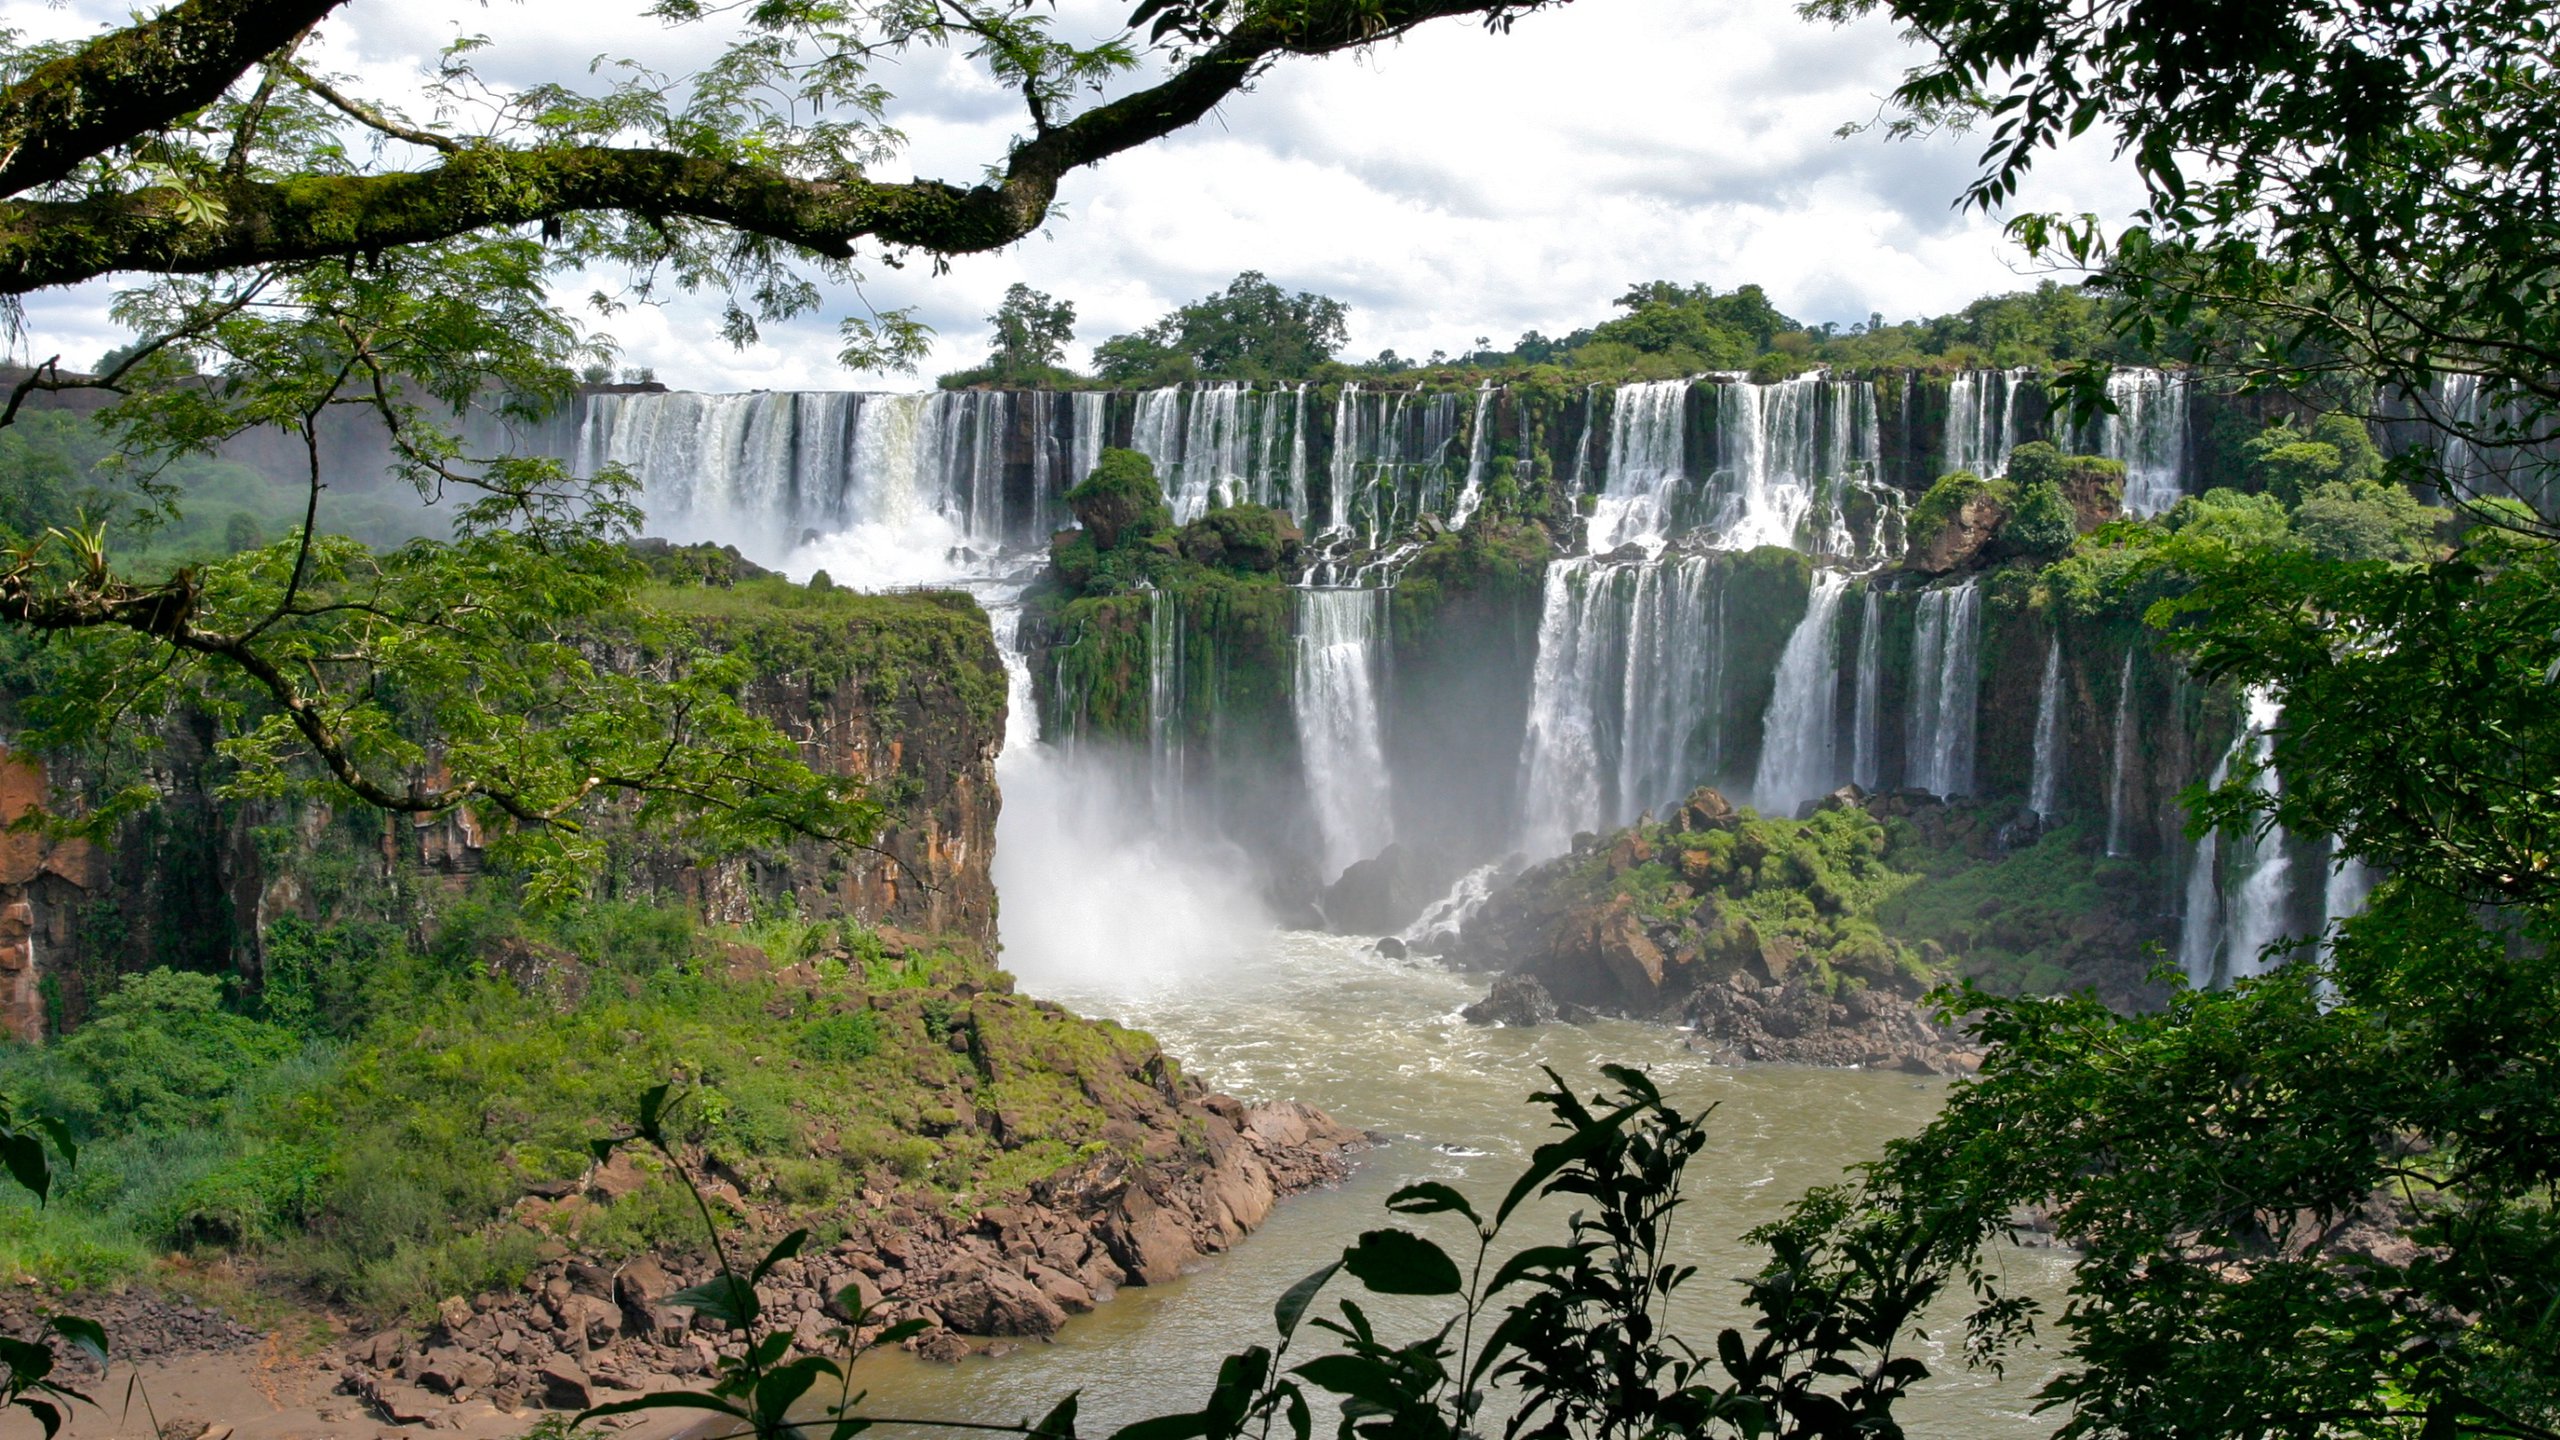 Personal impressions of the waterfall of Foz do Iguaçu in Brazil and Argentina, is the largest waterfall in the world by flow rate.